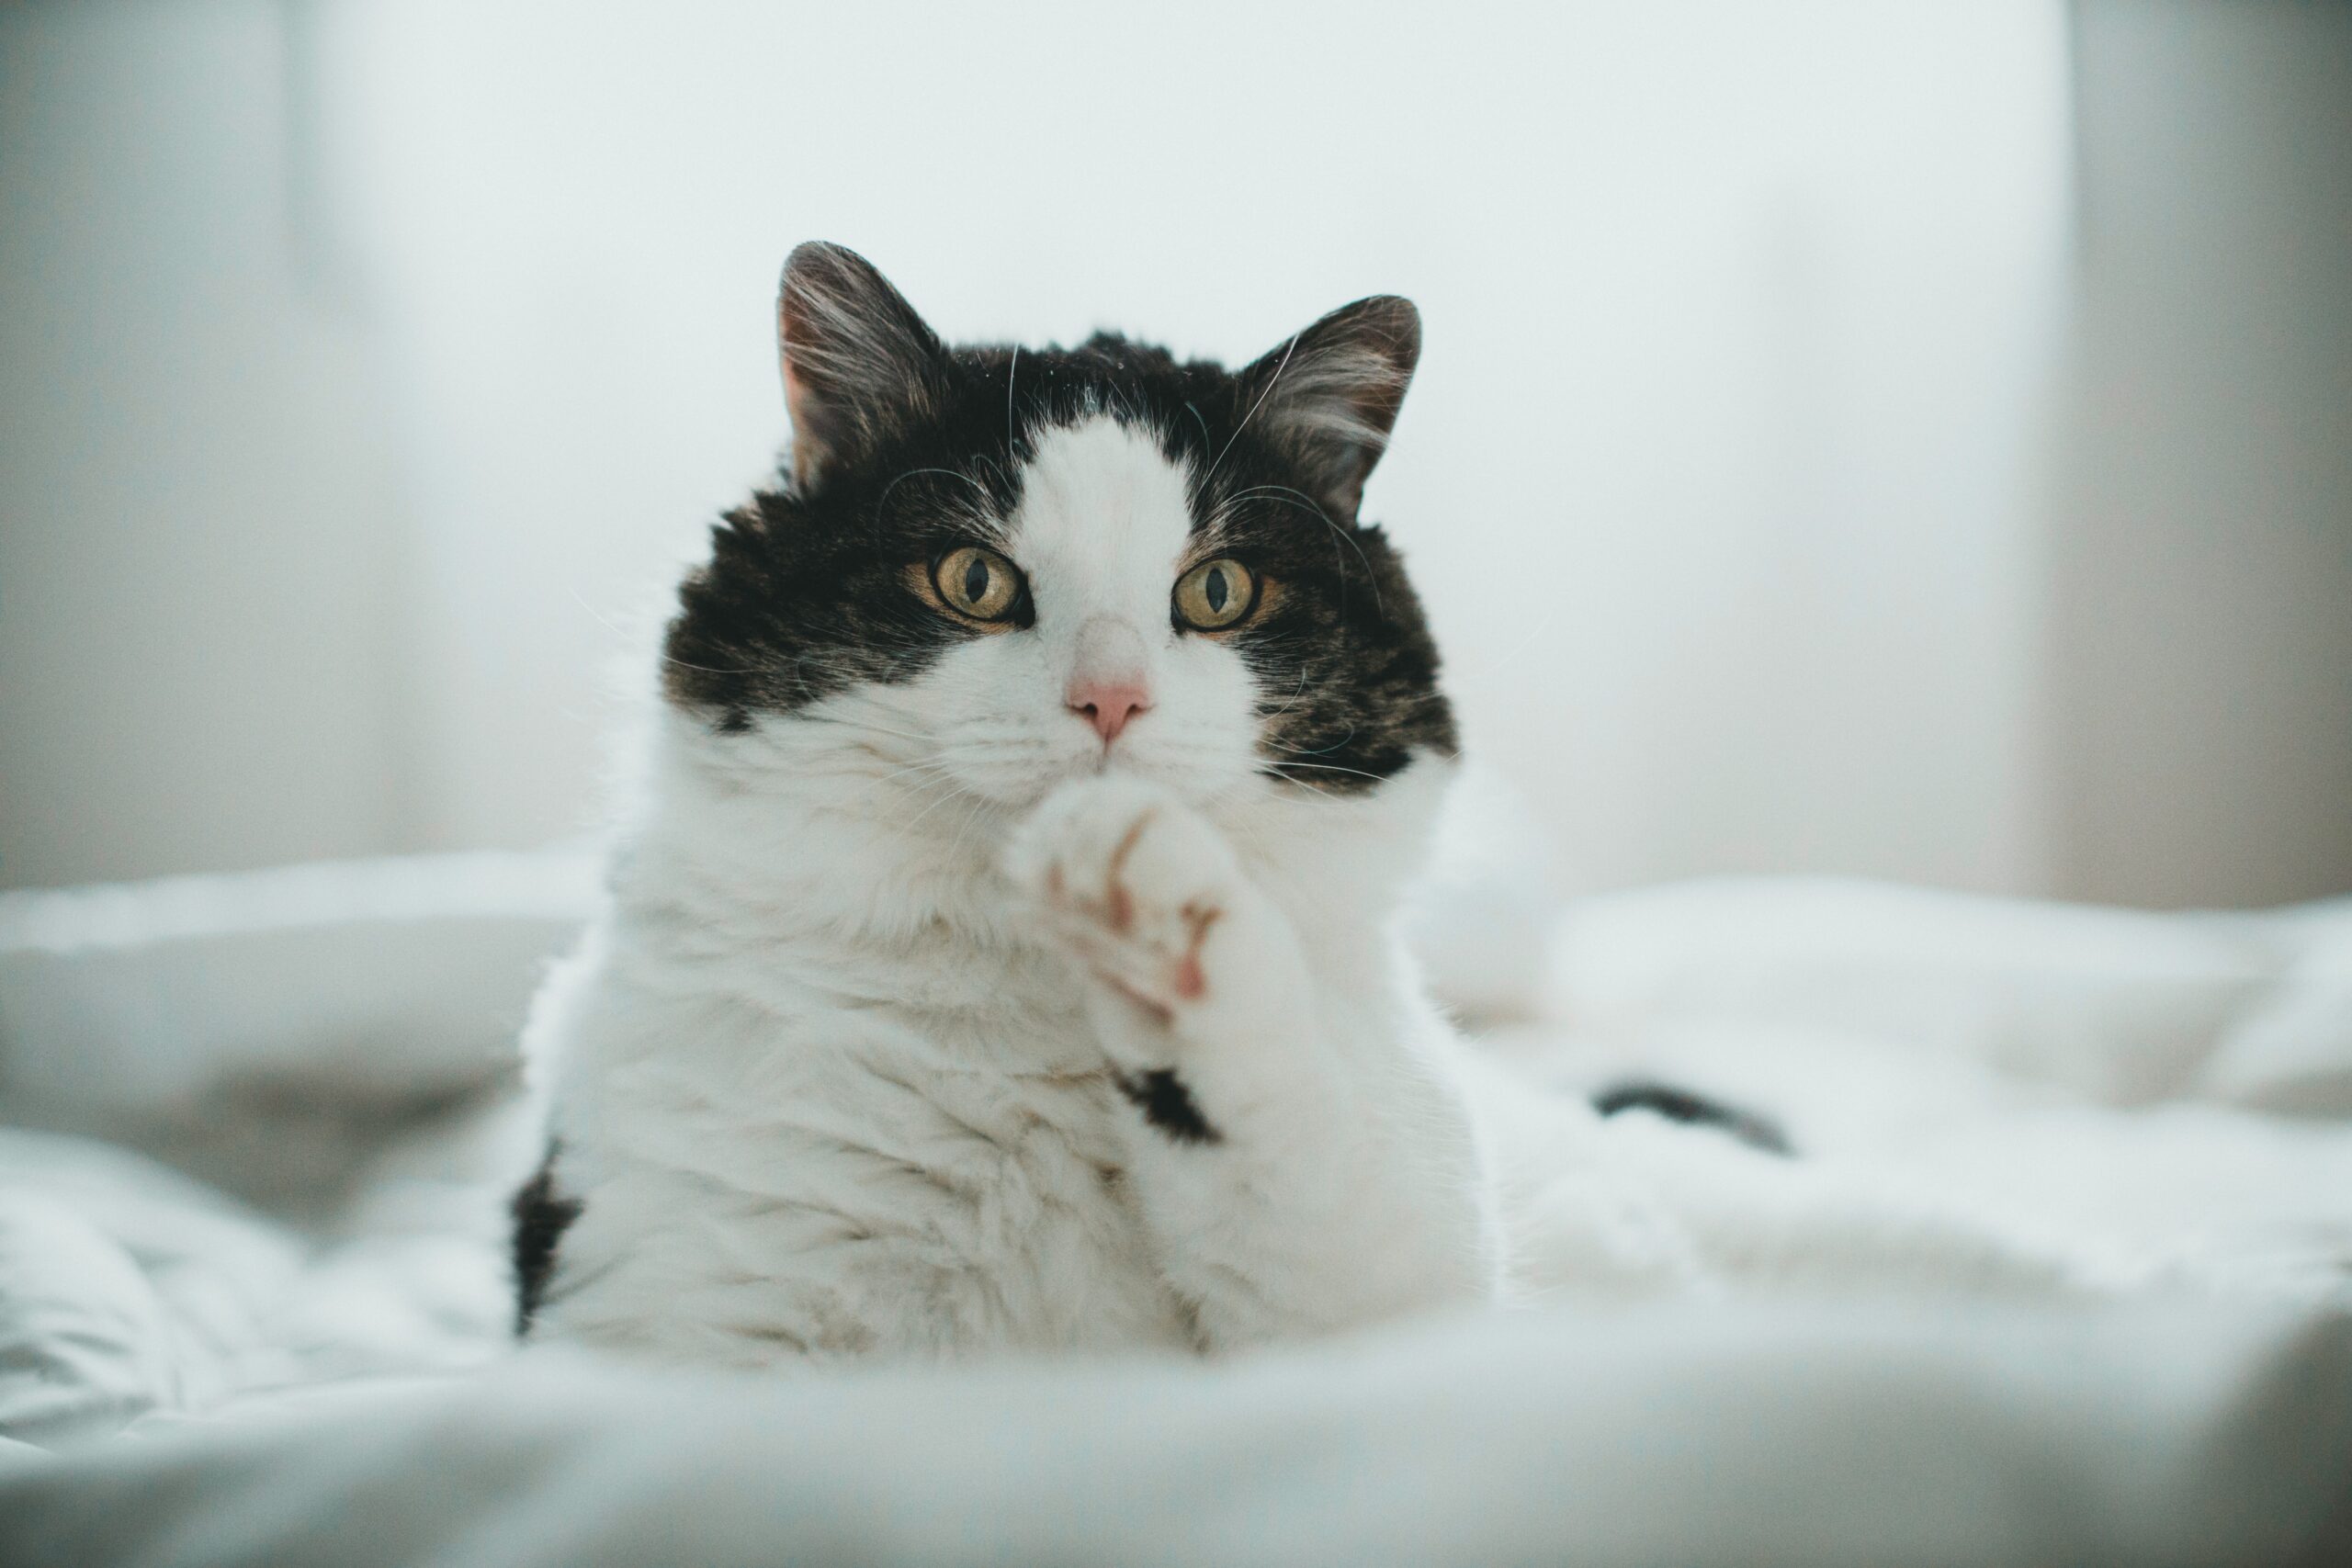 Adorable black and white cat lounging comfortably on a cozy bed